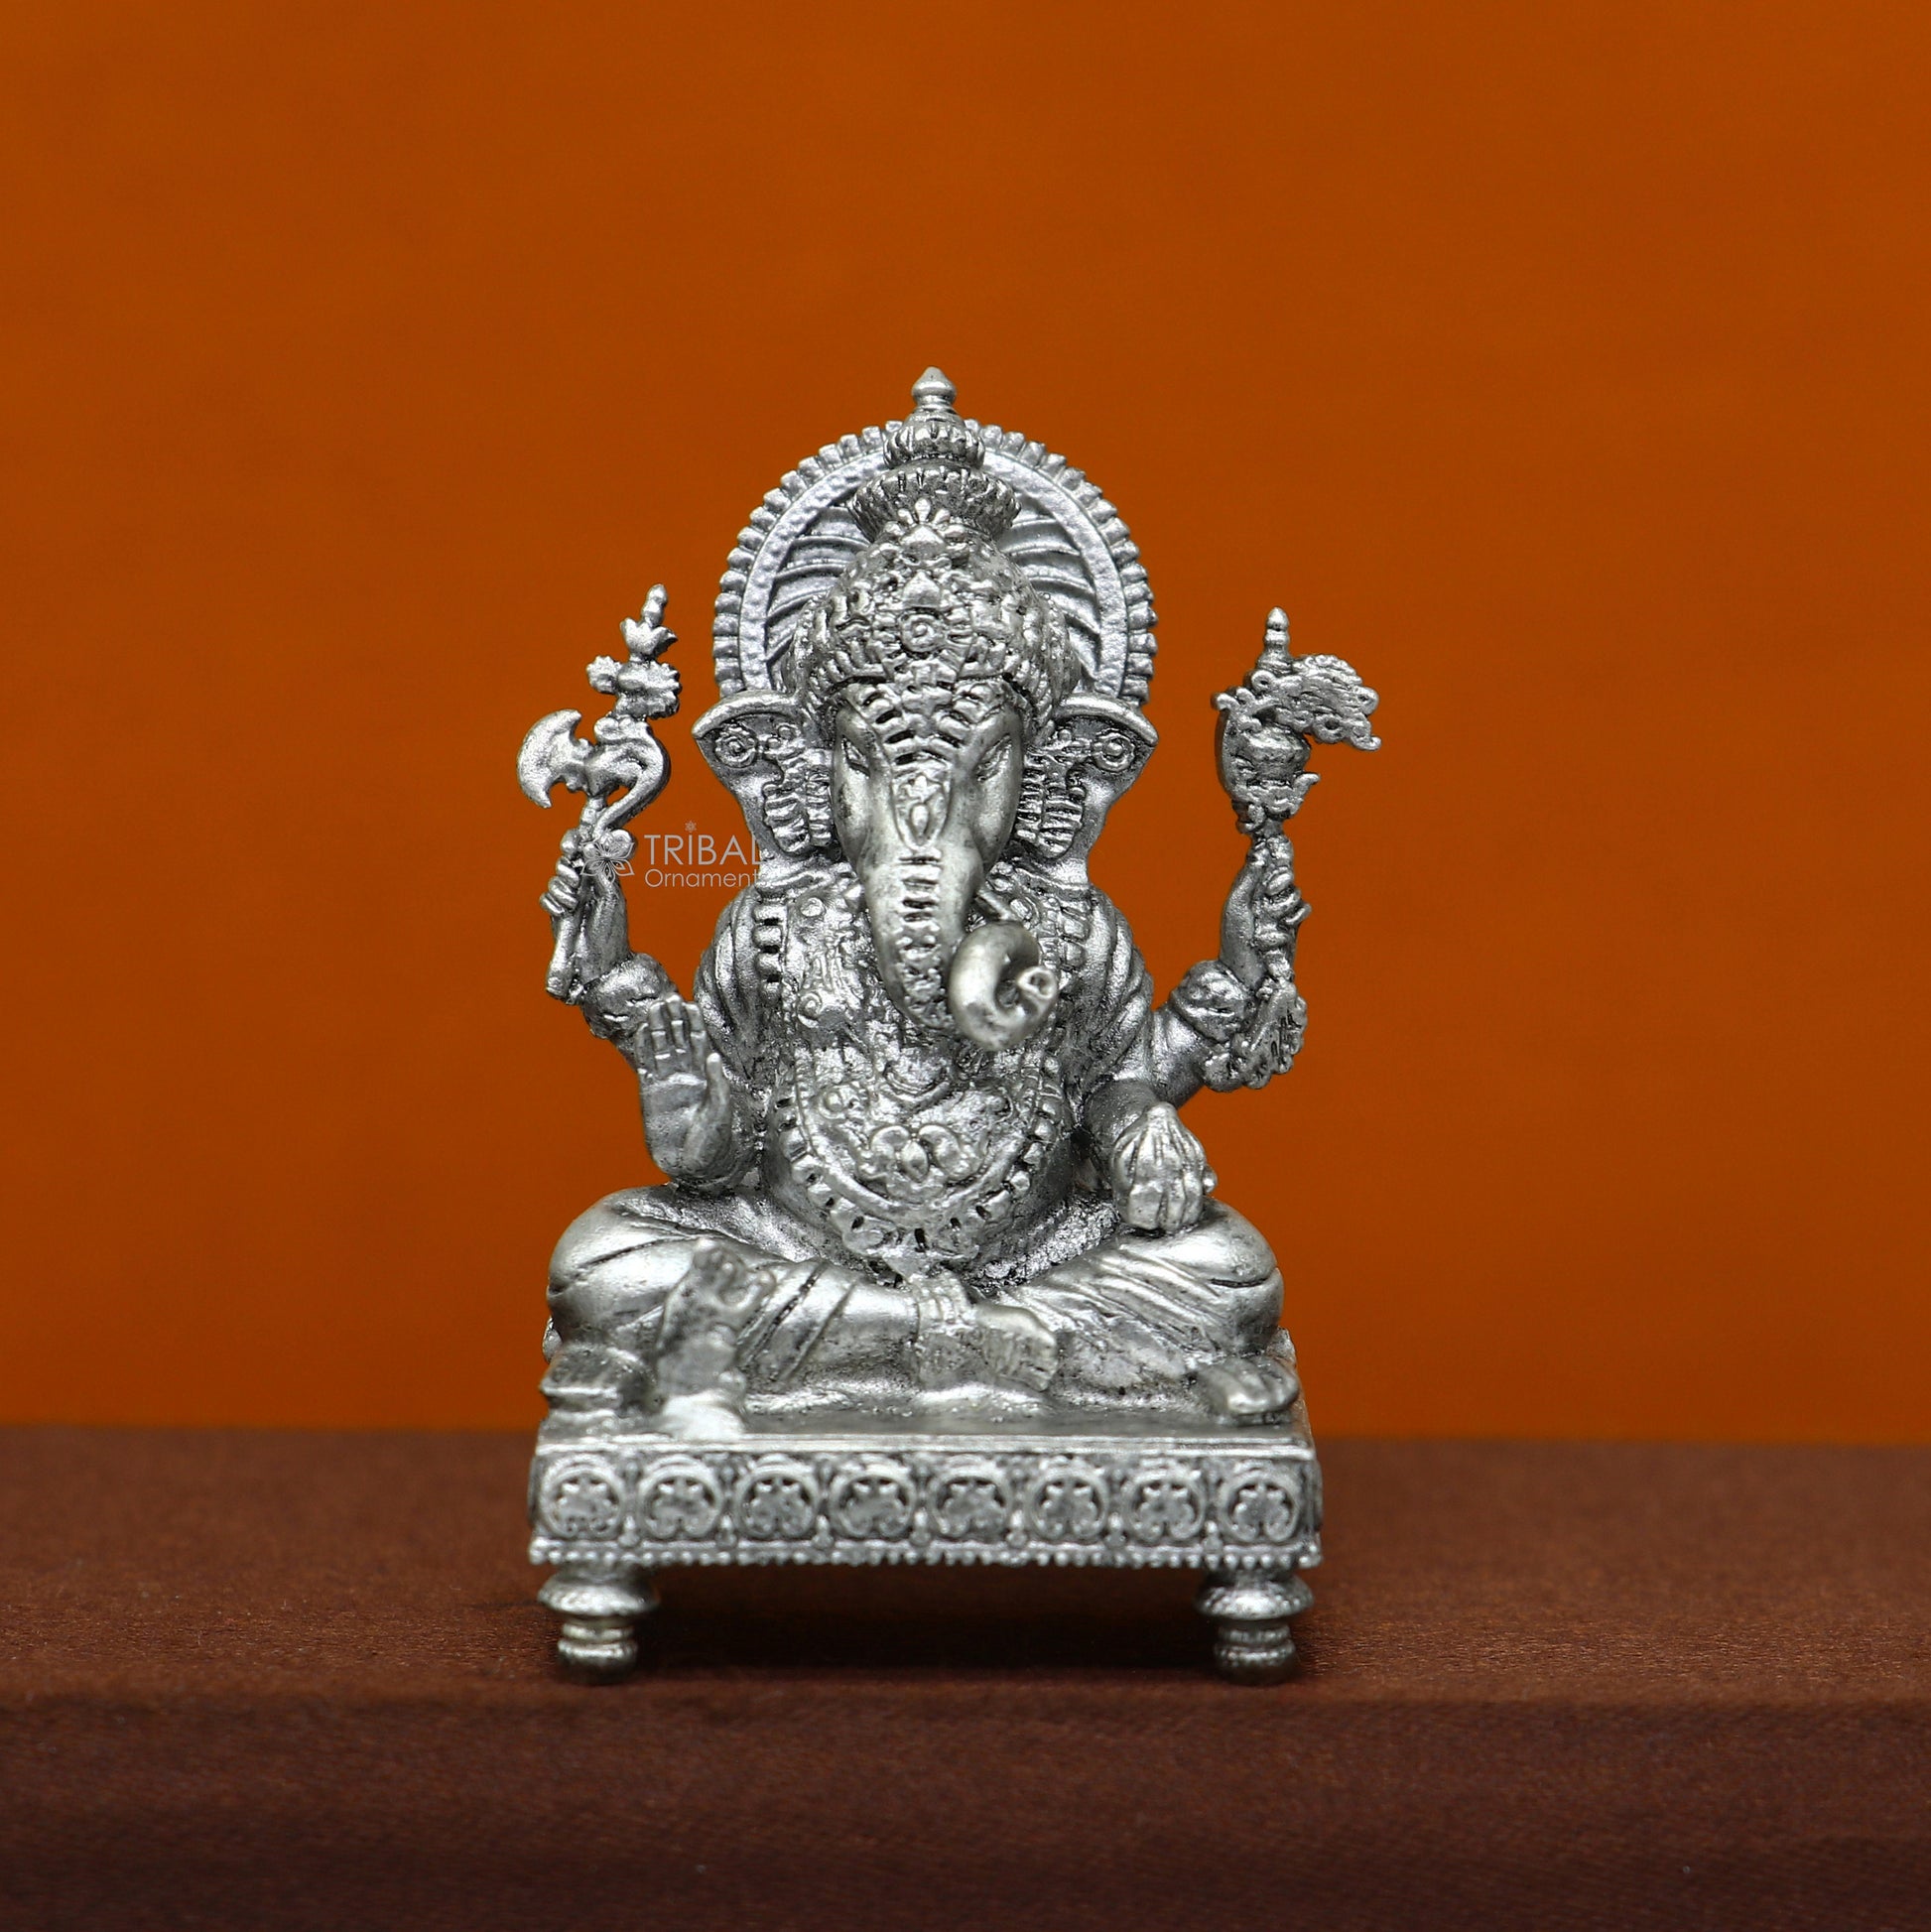 2" 925 Sterling silver handmade God Ganesha statue, puja article figurine, Diwali puja Divine silver article of prosperity and wealth art708 - TRIBAL ORNAMENTS